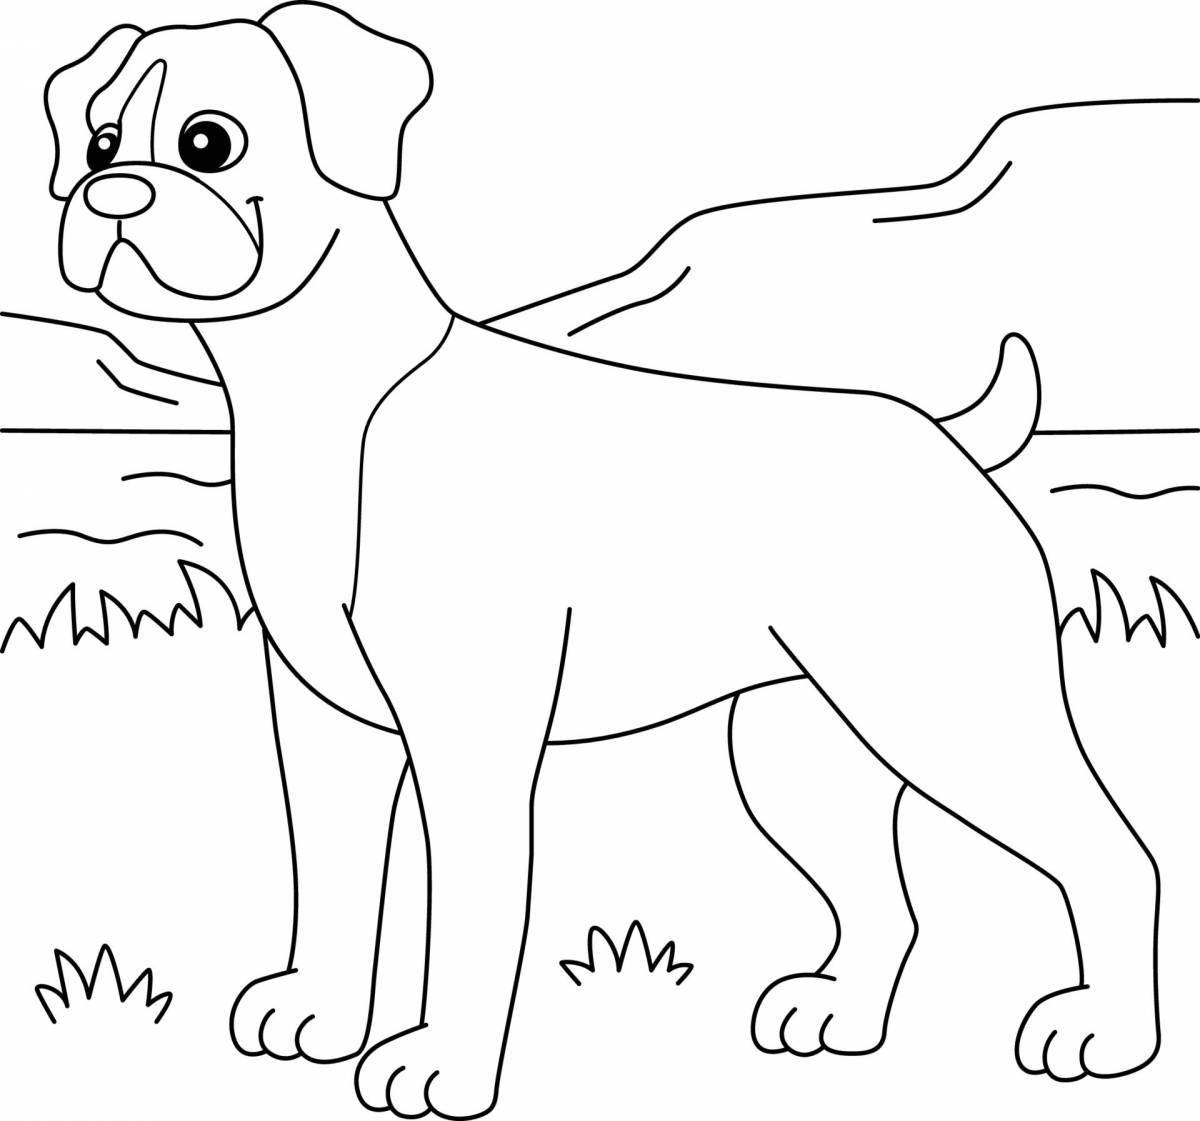 Coloring book brave boxer dog